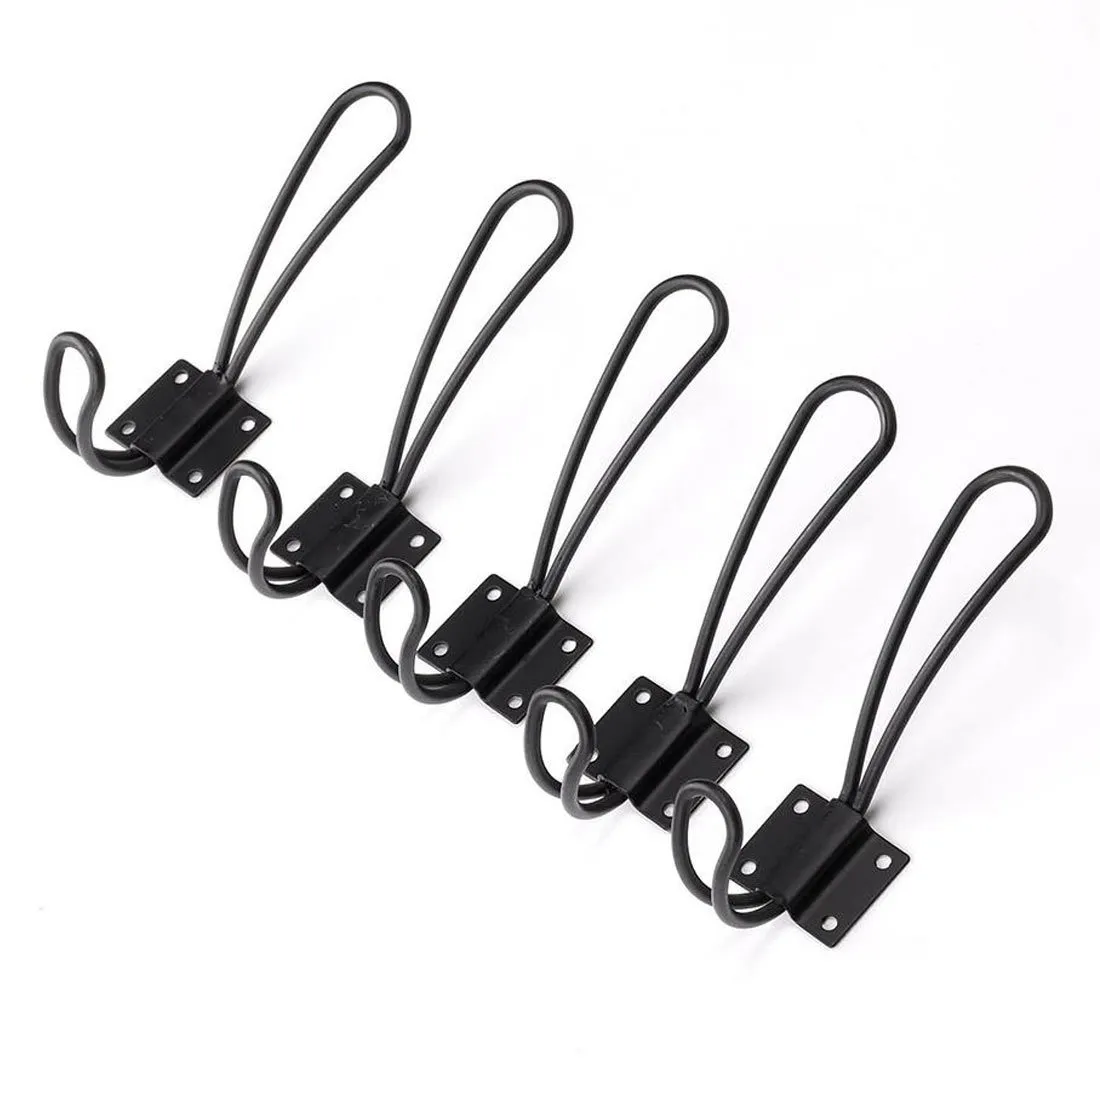 Vintage Black Metal Clothes Hanger Set With 5 Wire Hooks For Wall